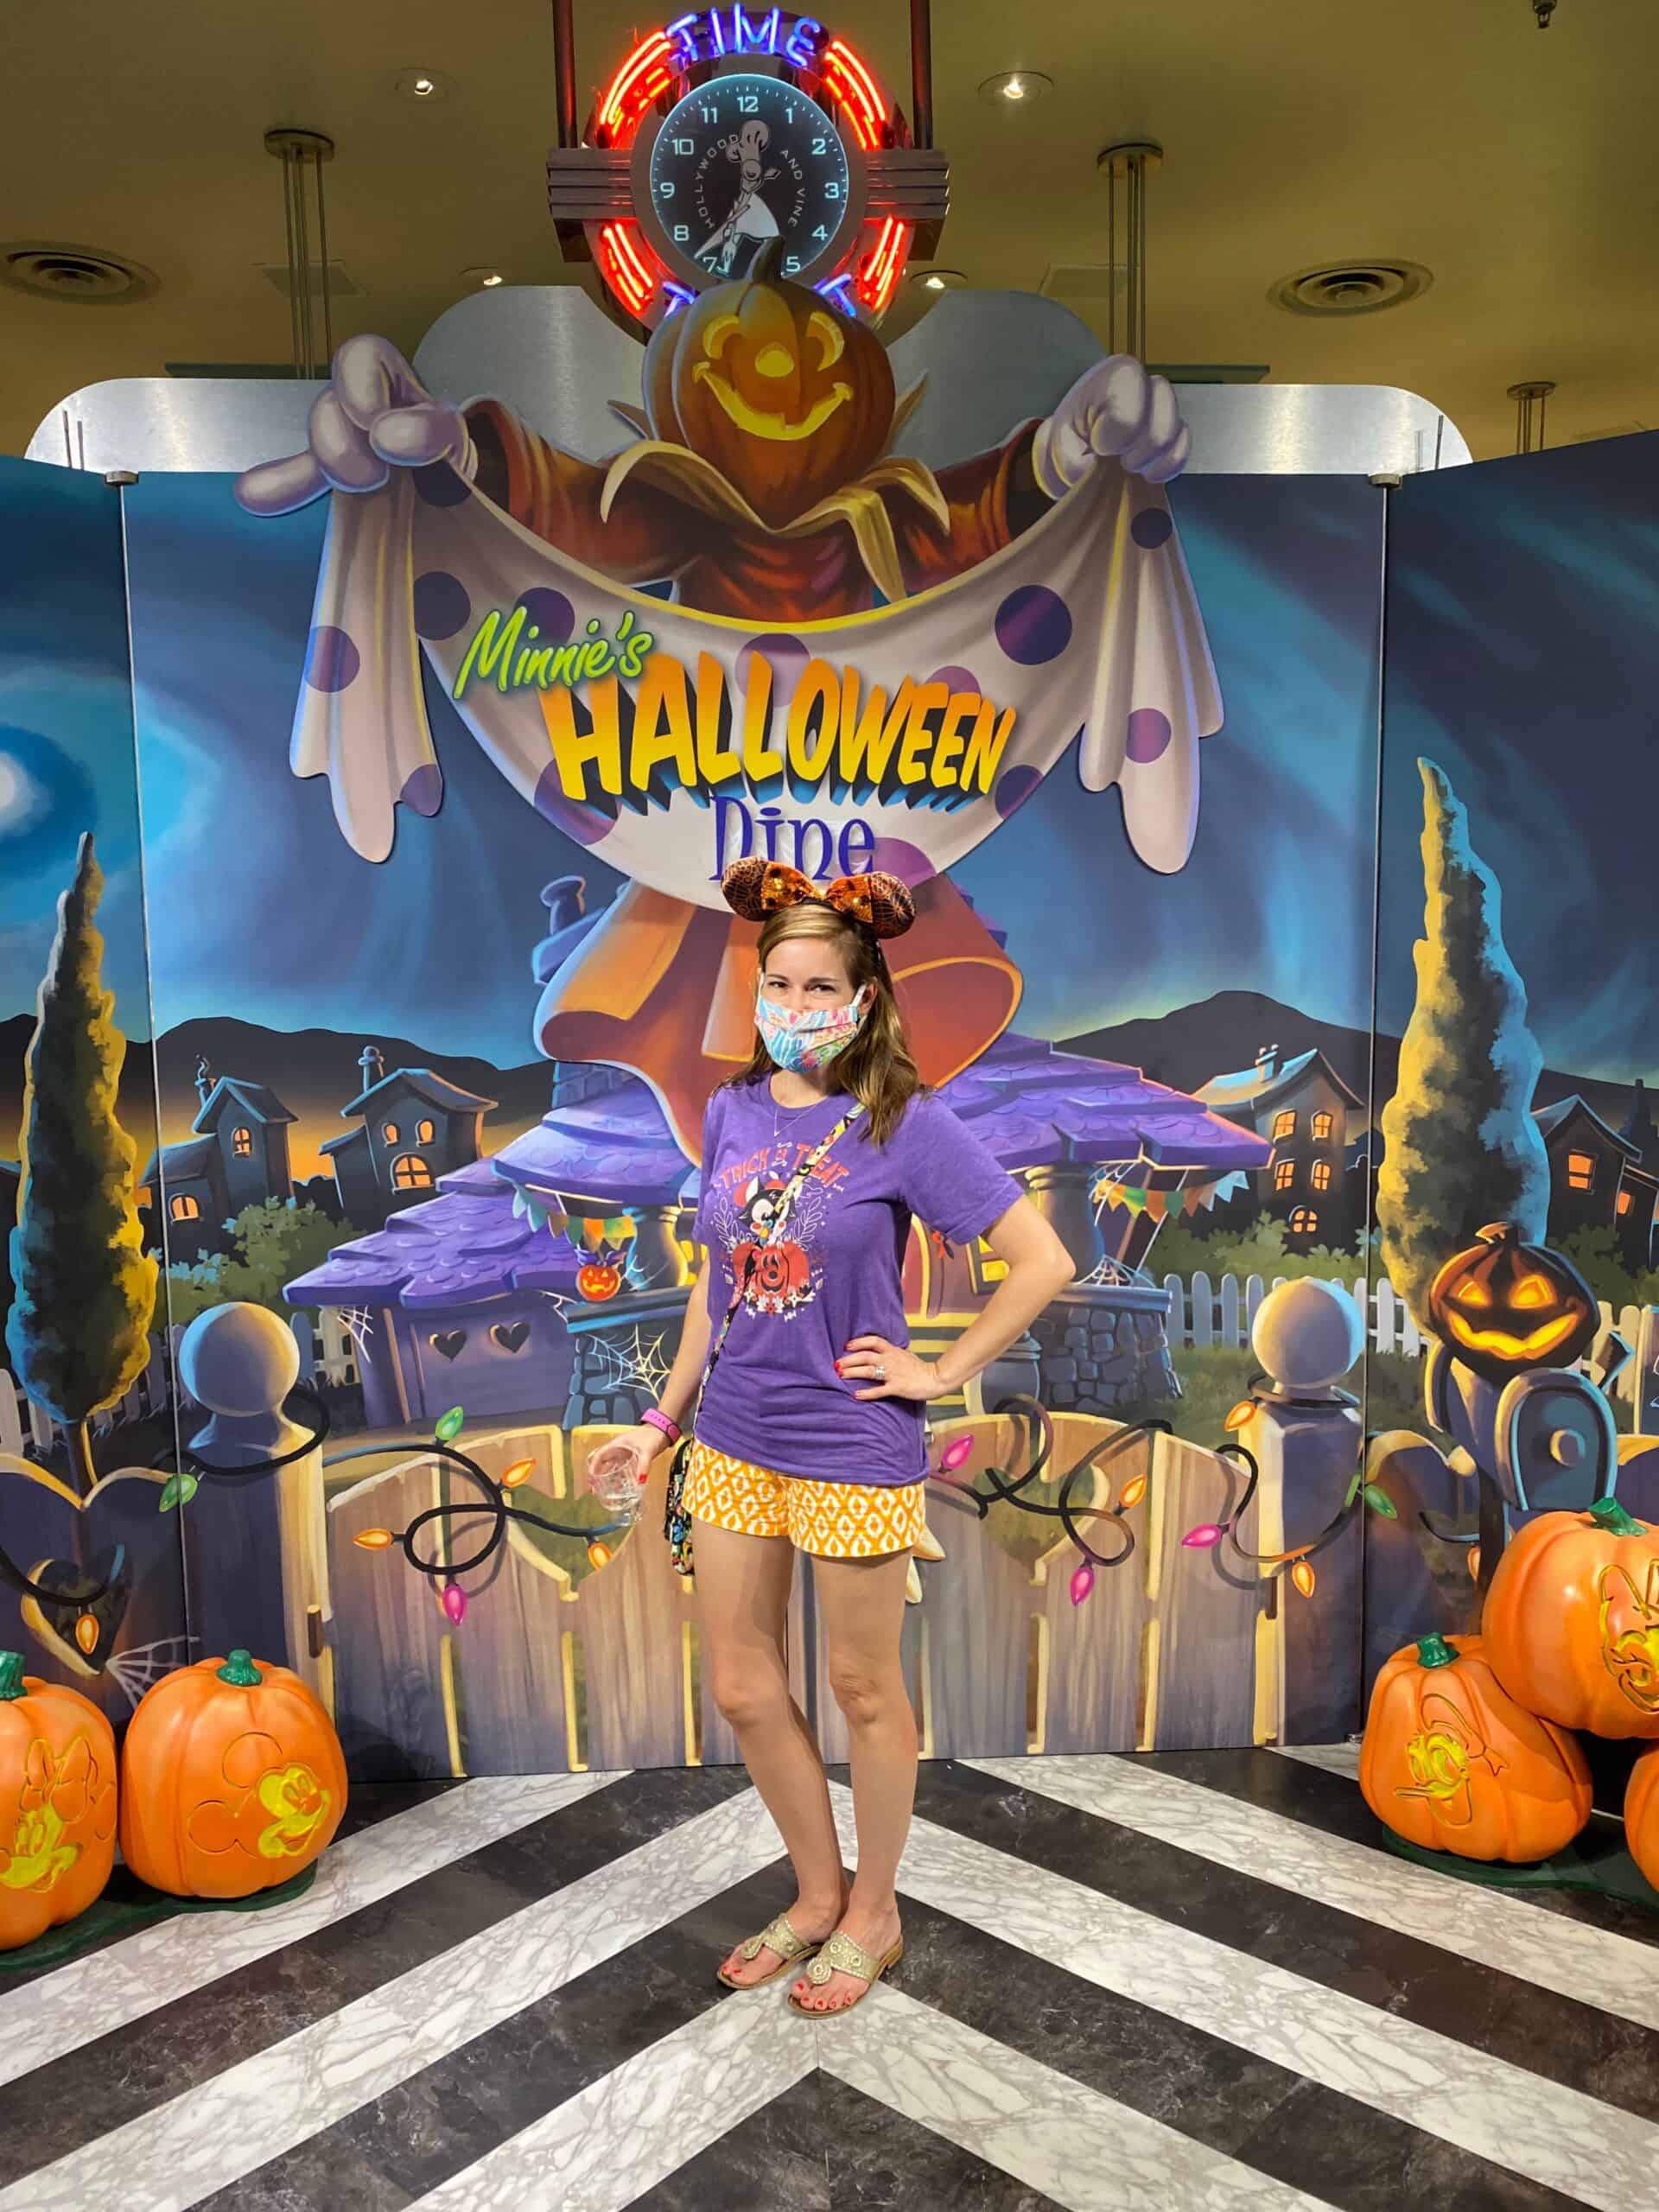 Minnies Halloween Dine At Hollywood And Vine In Disneys Hollywood